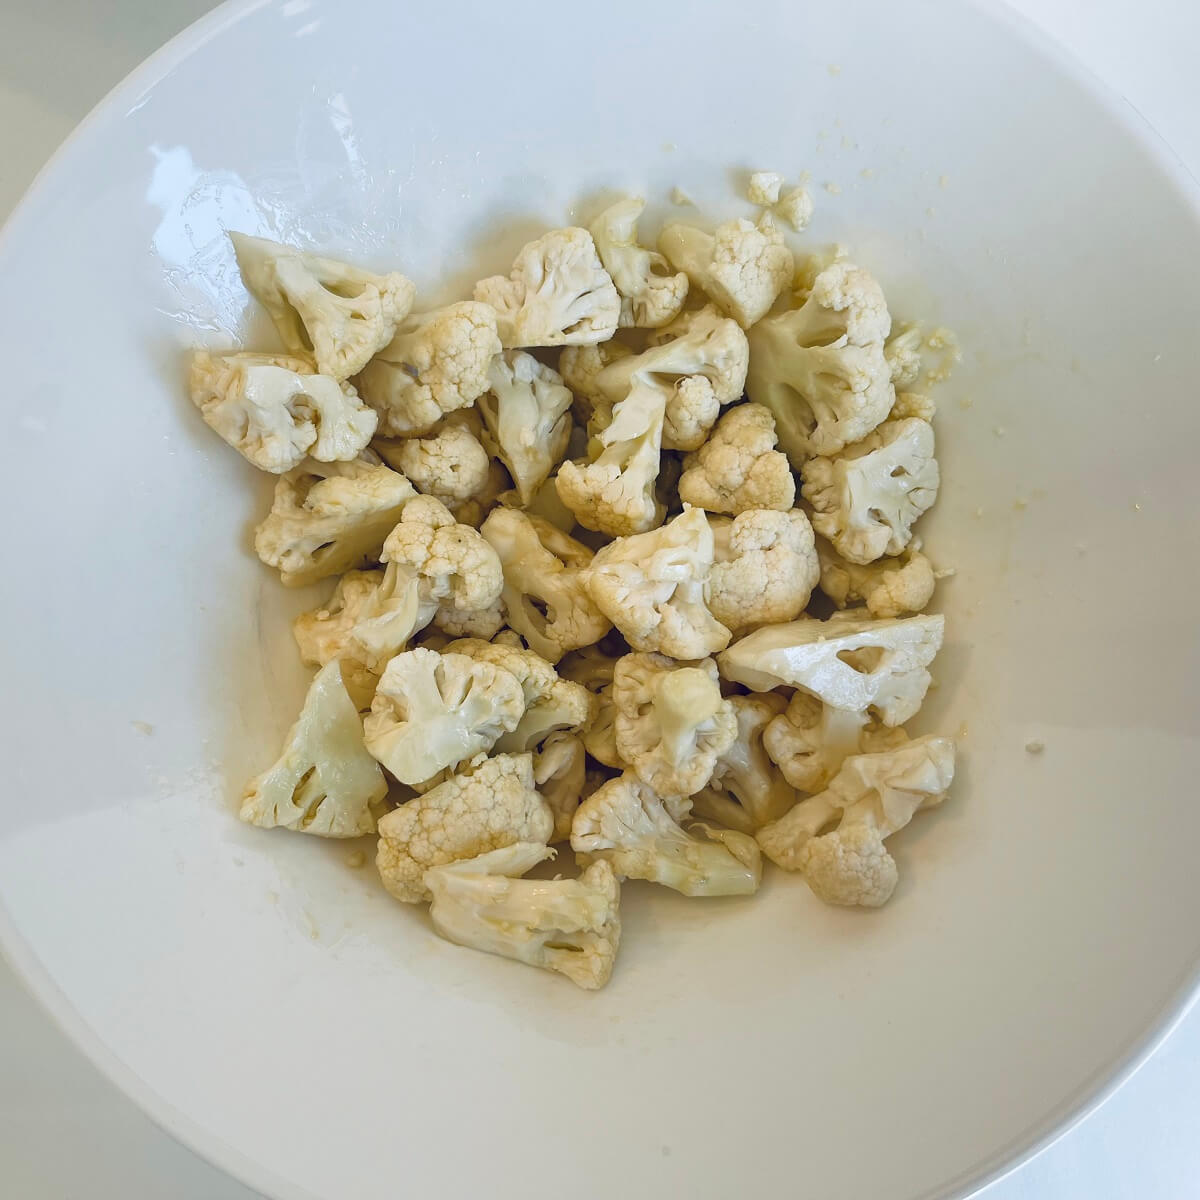 Cauliflower pieces in a large white bowl.